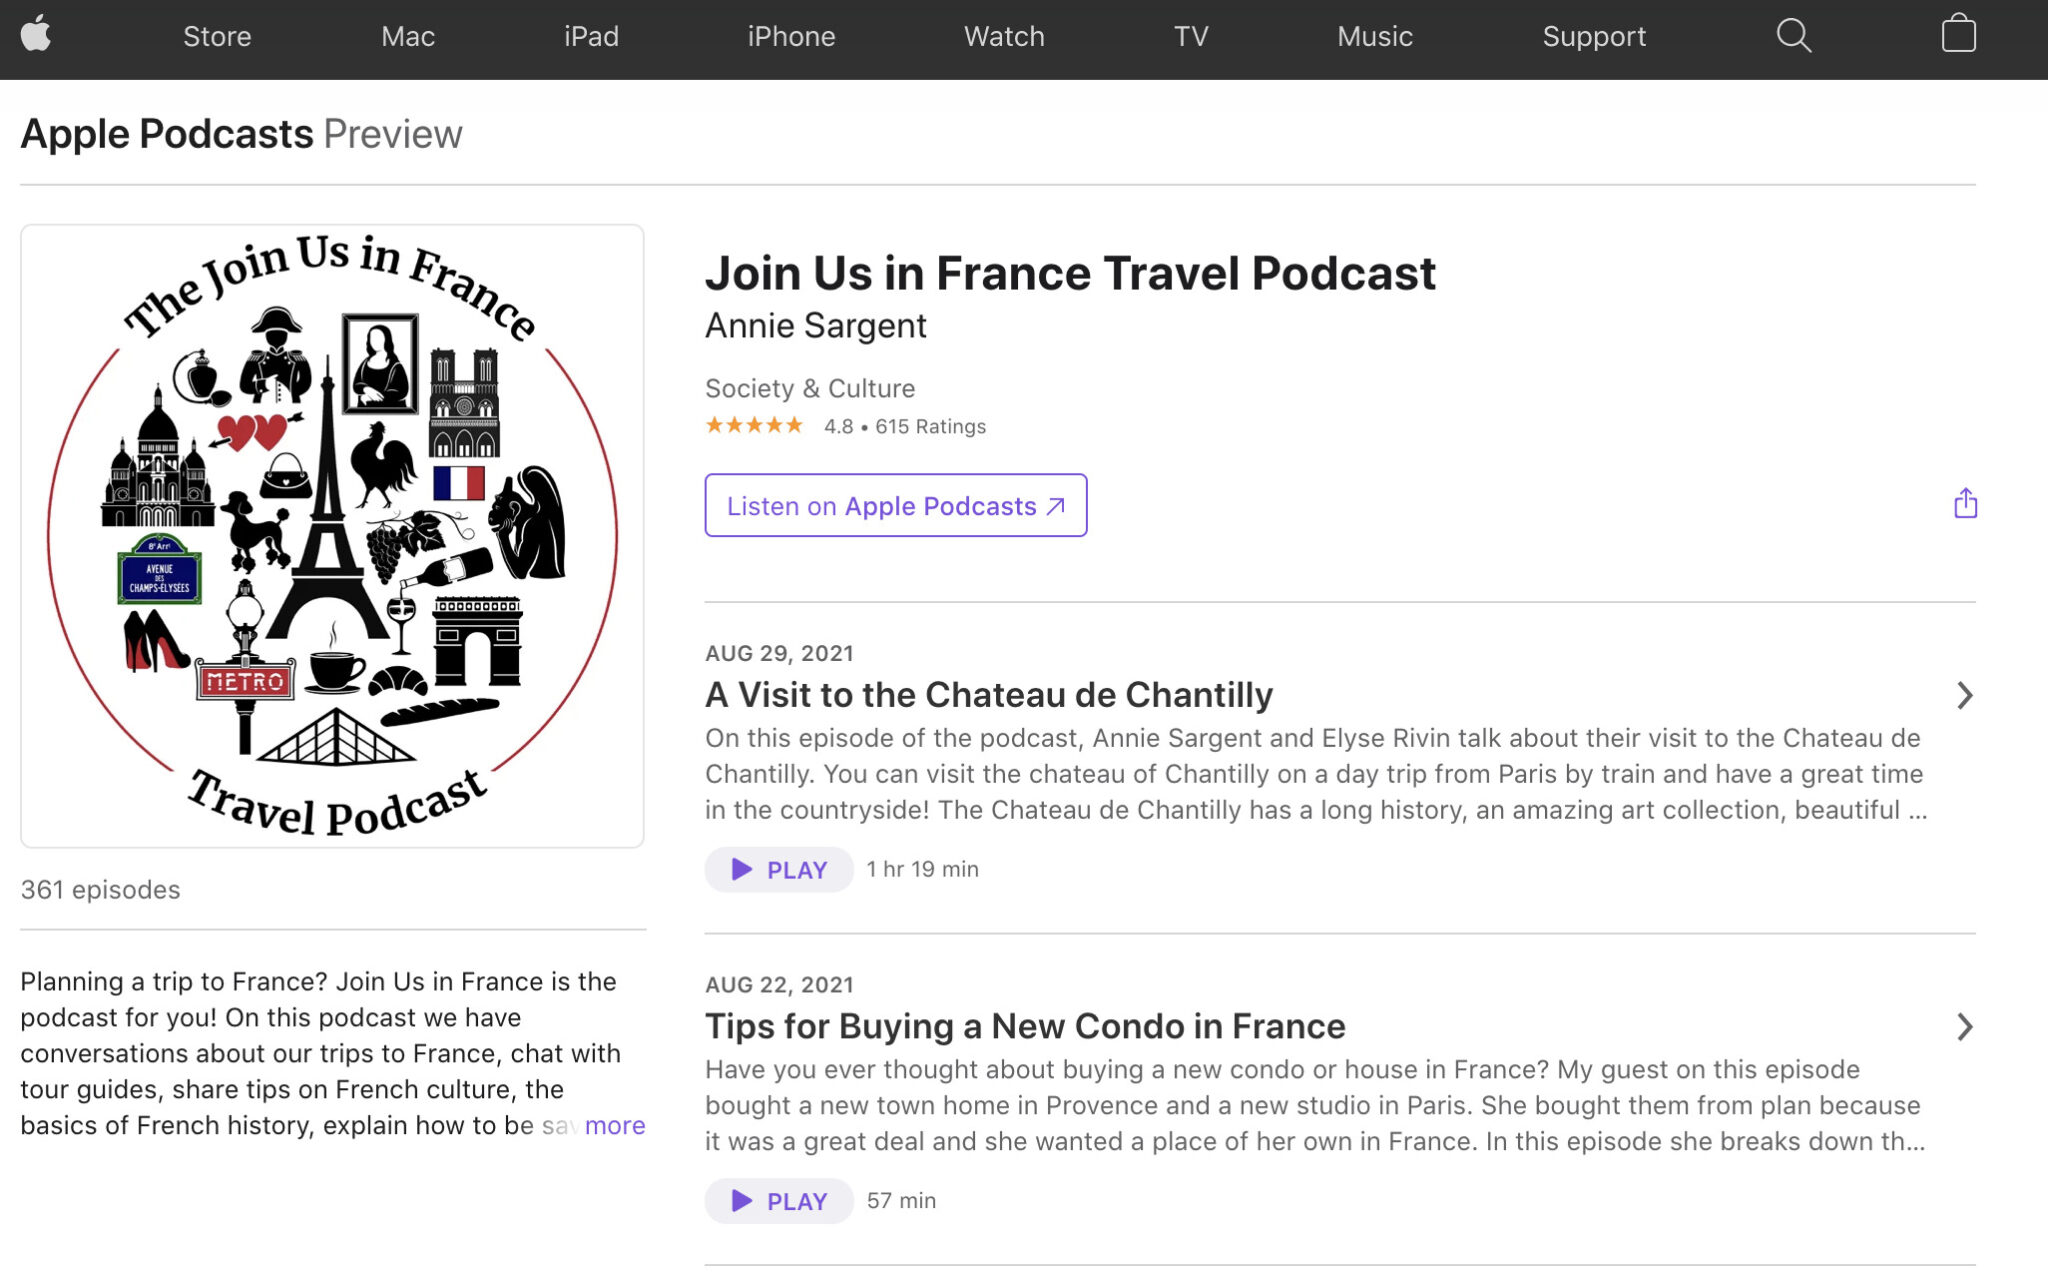 JOIN US IN FRANCE PODCAST